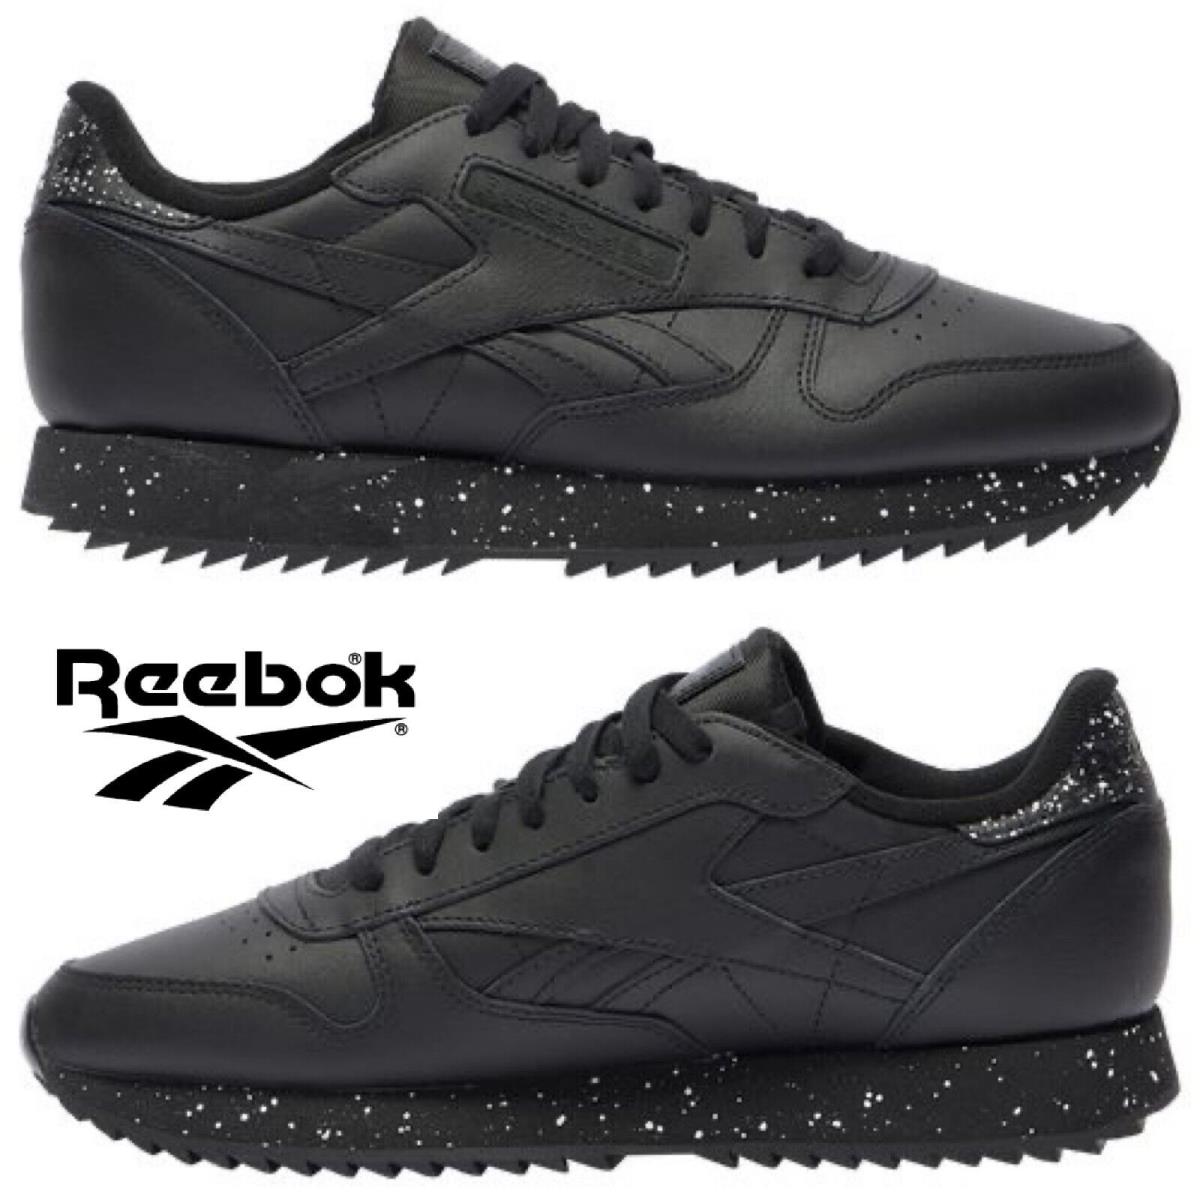 Reebok Classic Leather Men`s Sneakers Running Training Shoes Casual Sport Black